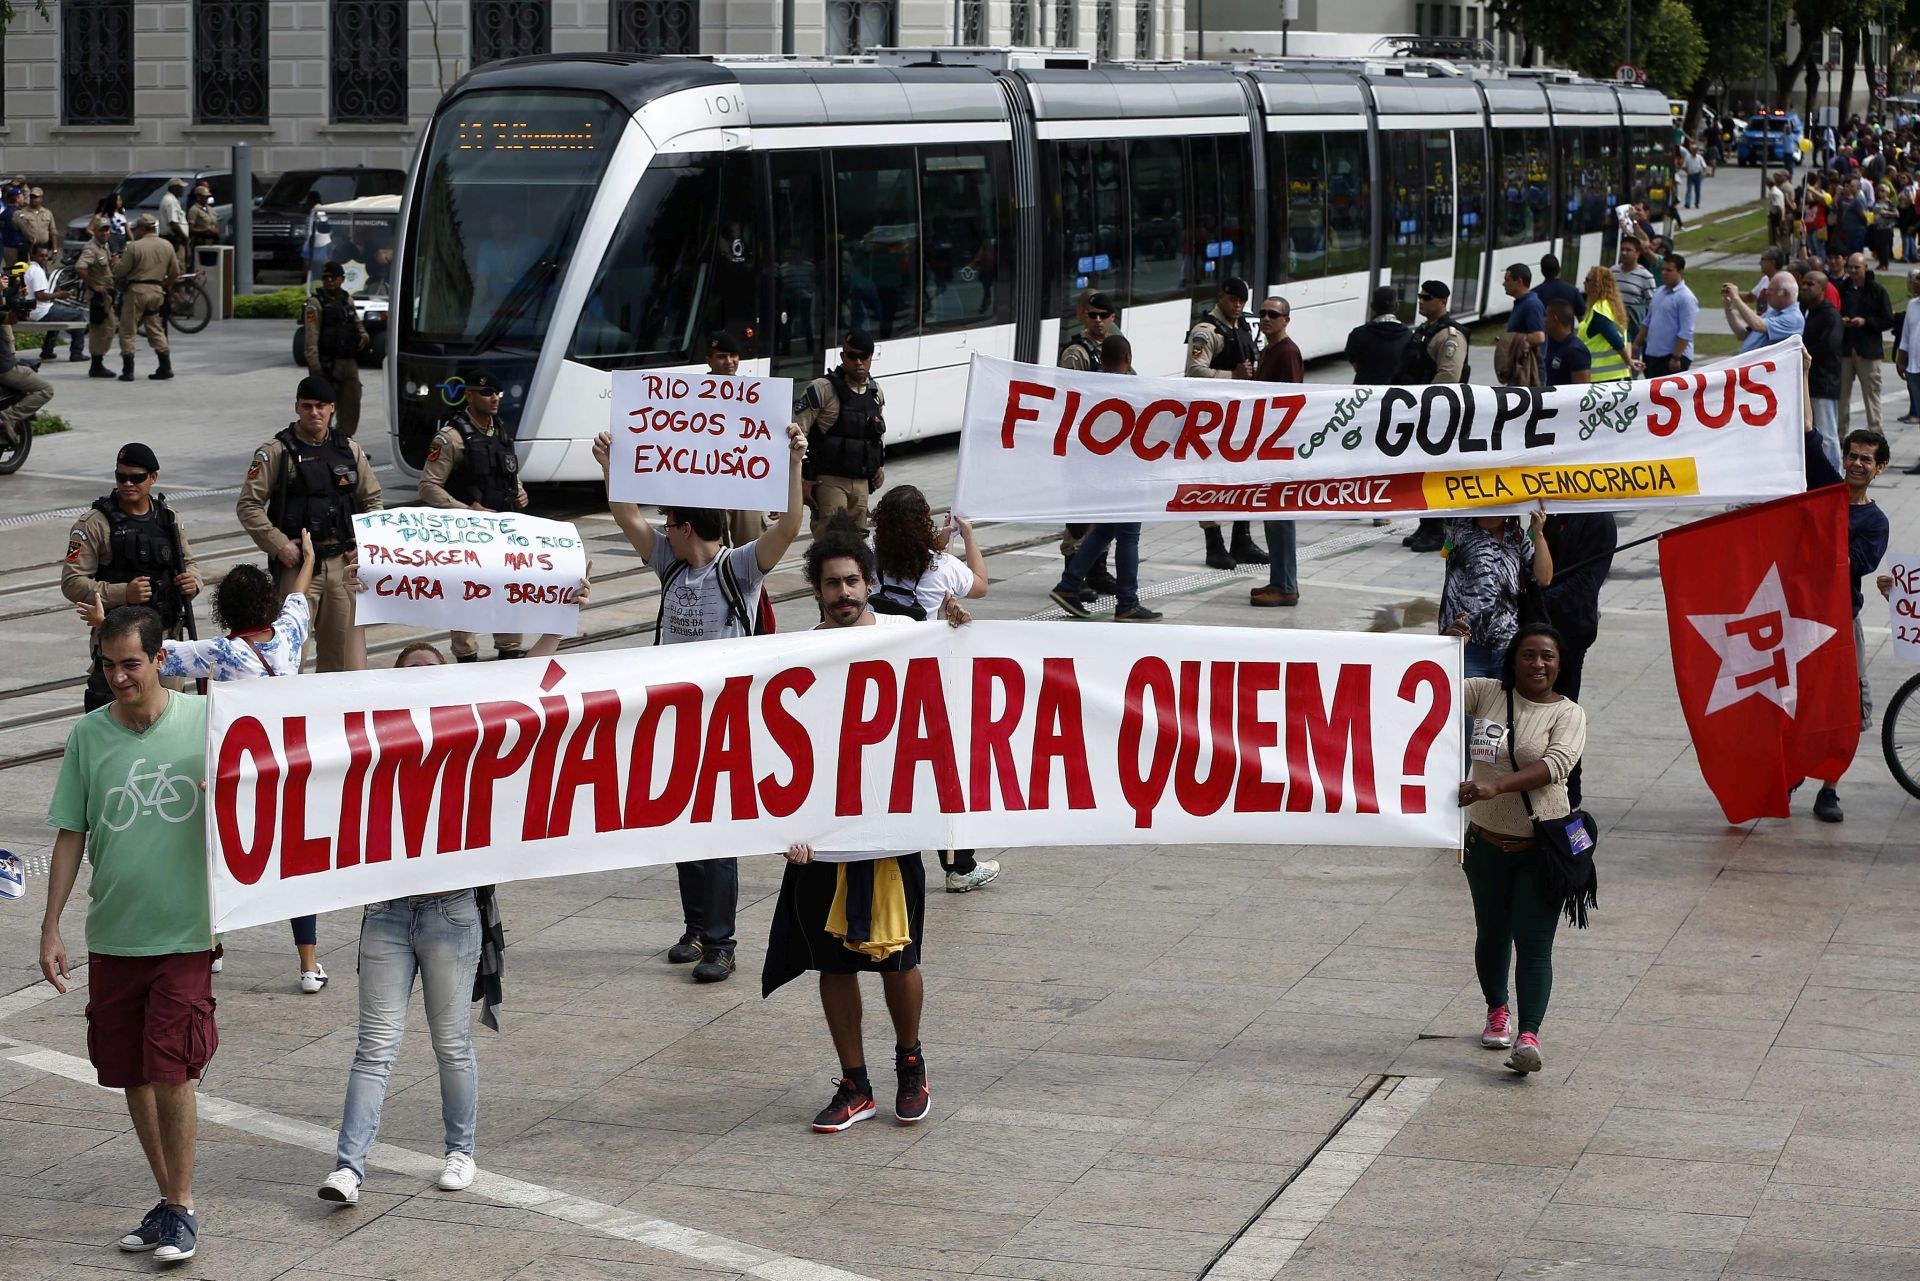 epa05347628 A group of people protesting with banners that read 'Olympics for whom' as an electric tramway that will travel through several streets of the city center replacing numerous bus lines and was conceived as one of the main Olympic legacies begins operating in Rio de Janeiro, Brazil, on 05 June 2016.  EPA/Marcelo Sayao